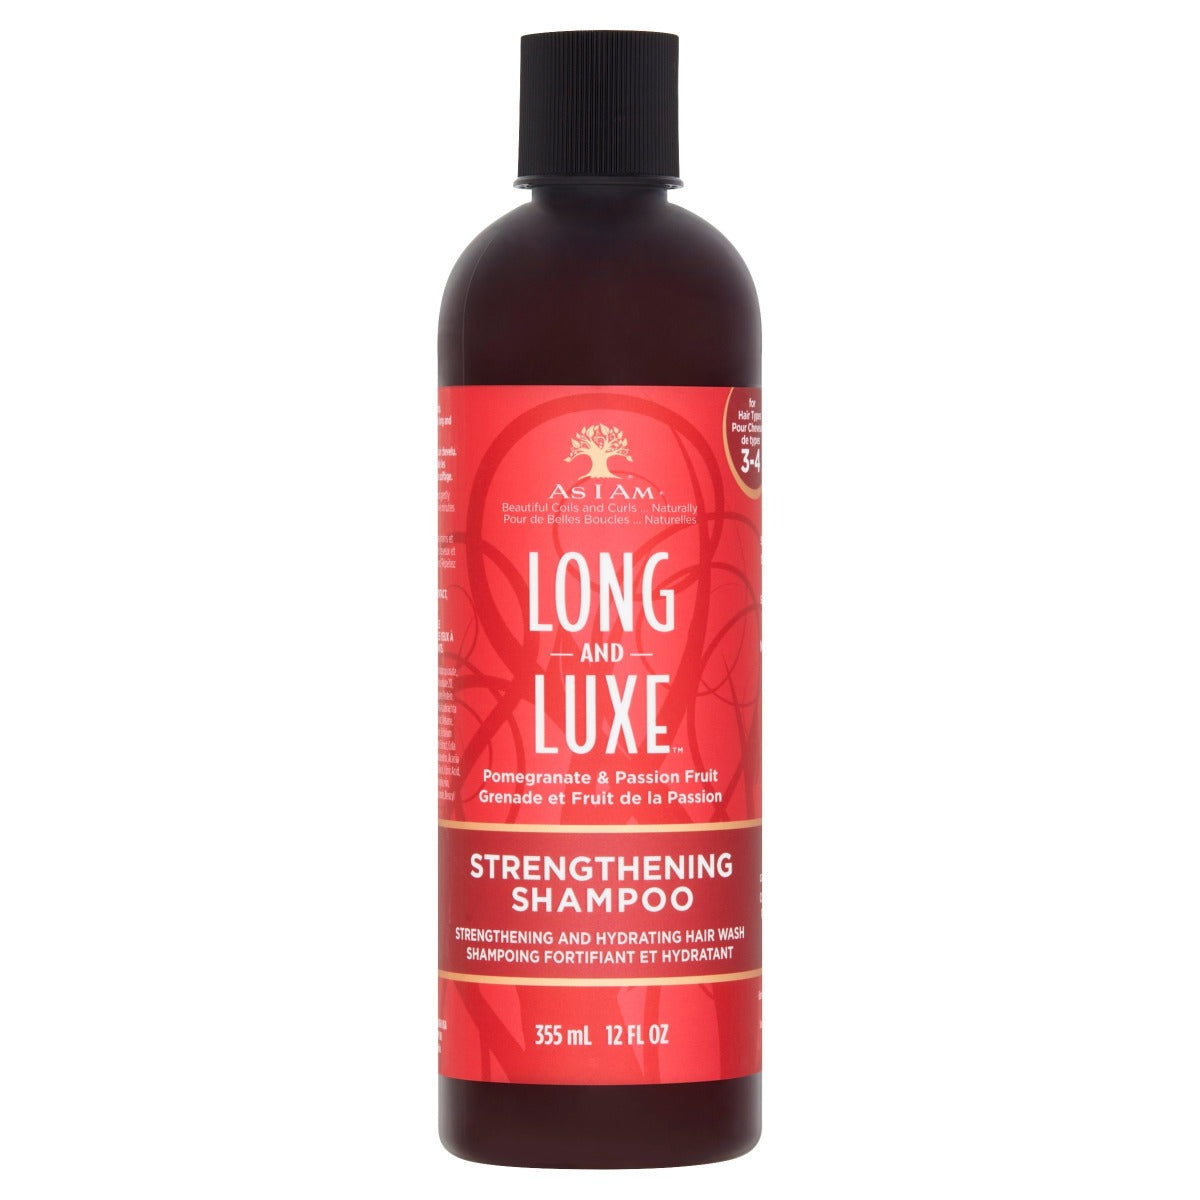 As I Am Long & Luxe Pomegranate & Passion Fruit Strengthening Shampoo 355ml